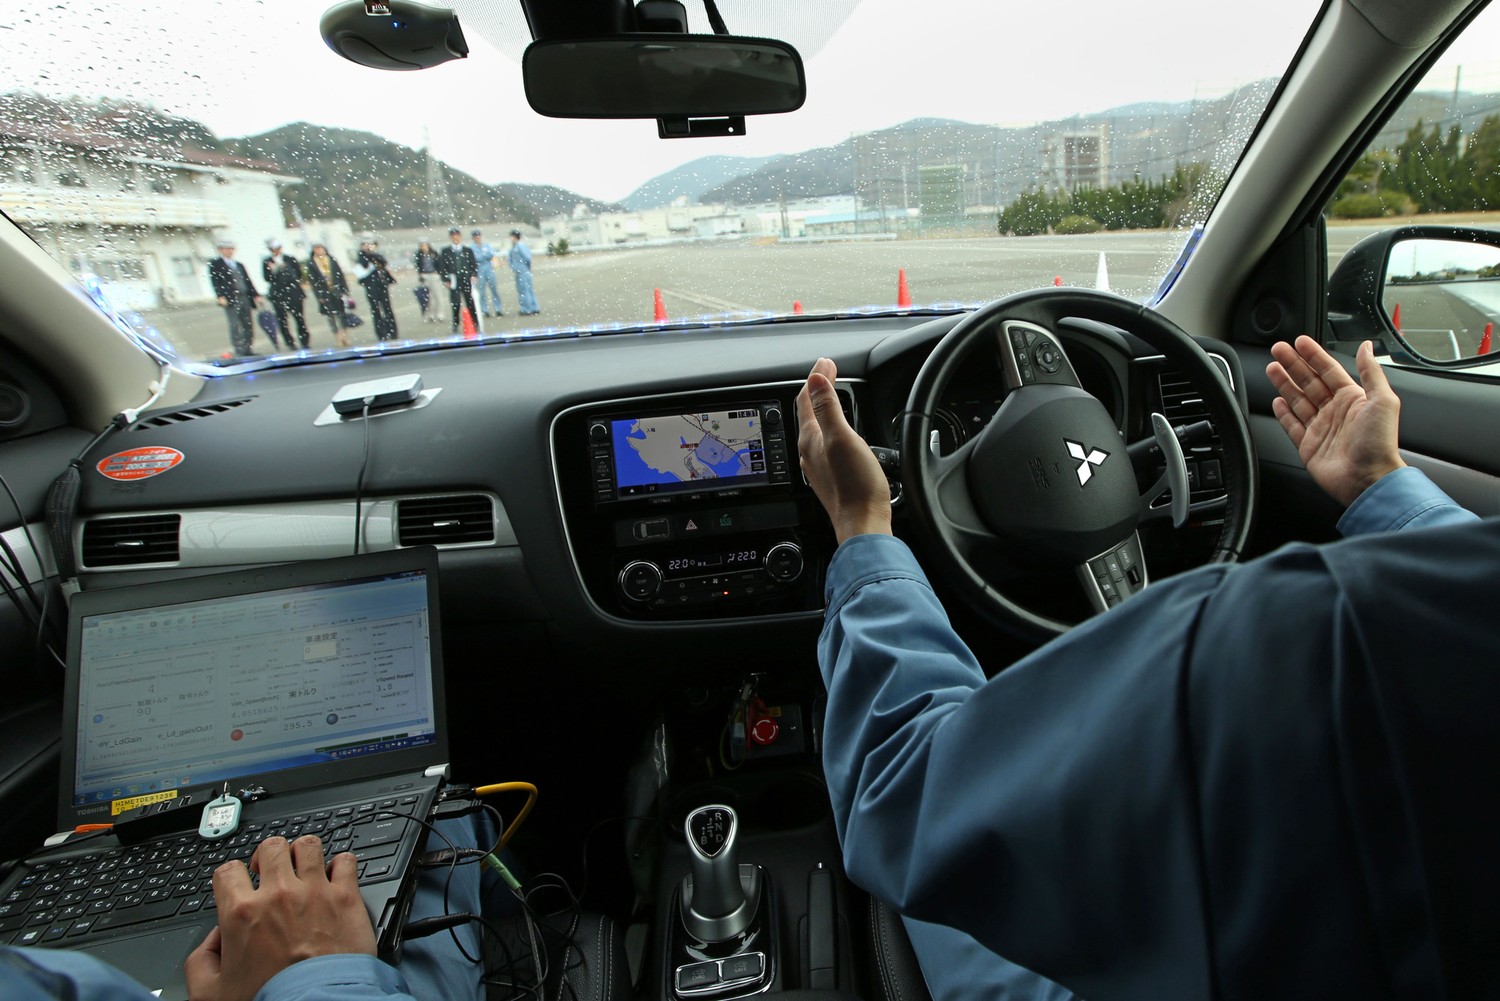 Mitsubishi Driver. Driver without car. Technology Driver. Car way on the Screen on Driving software.